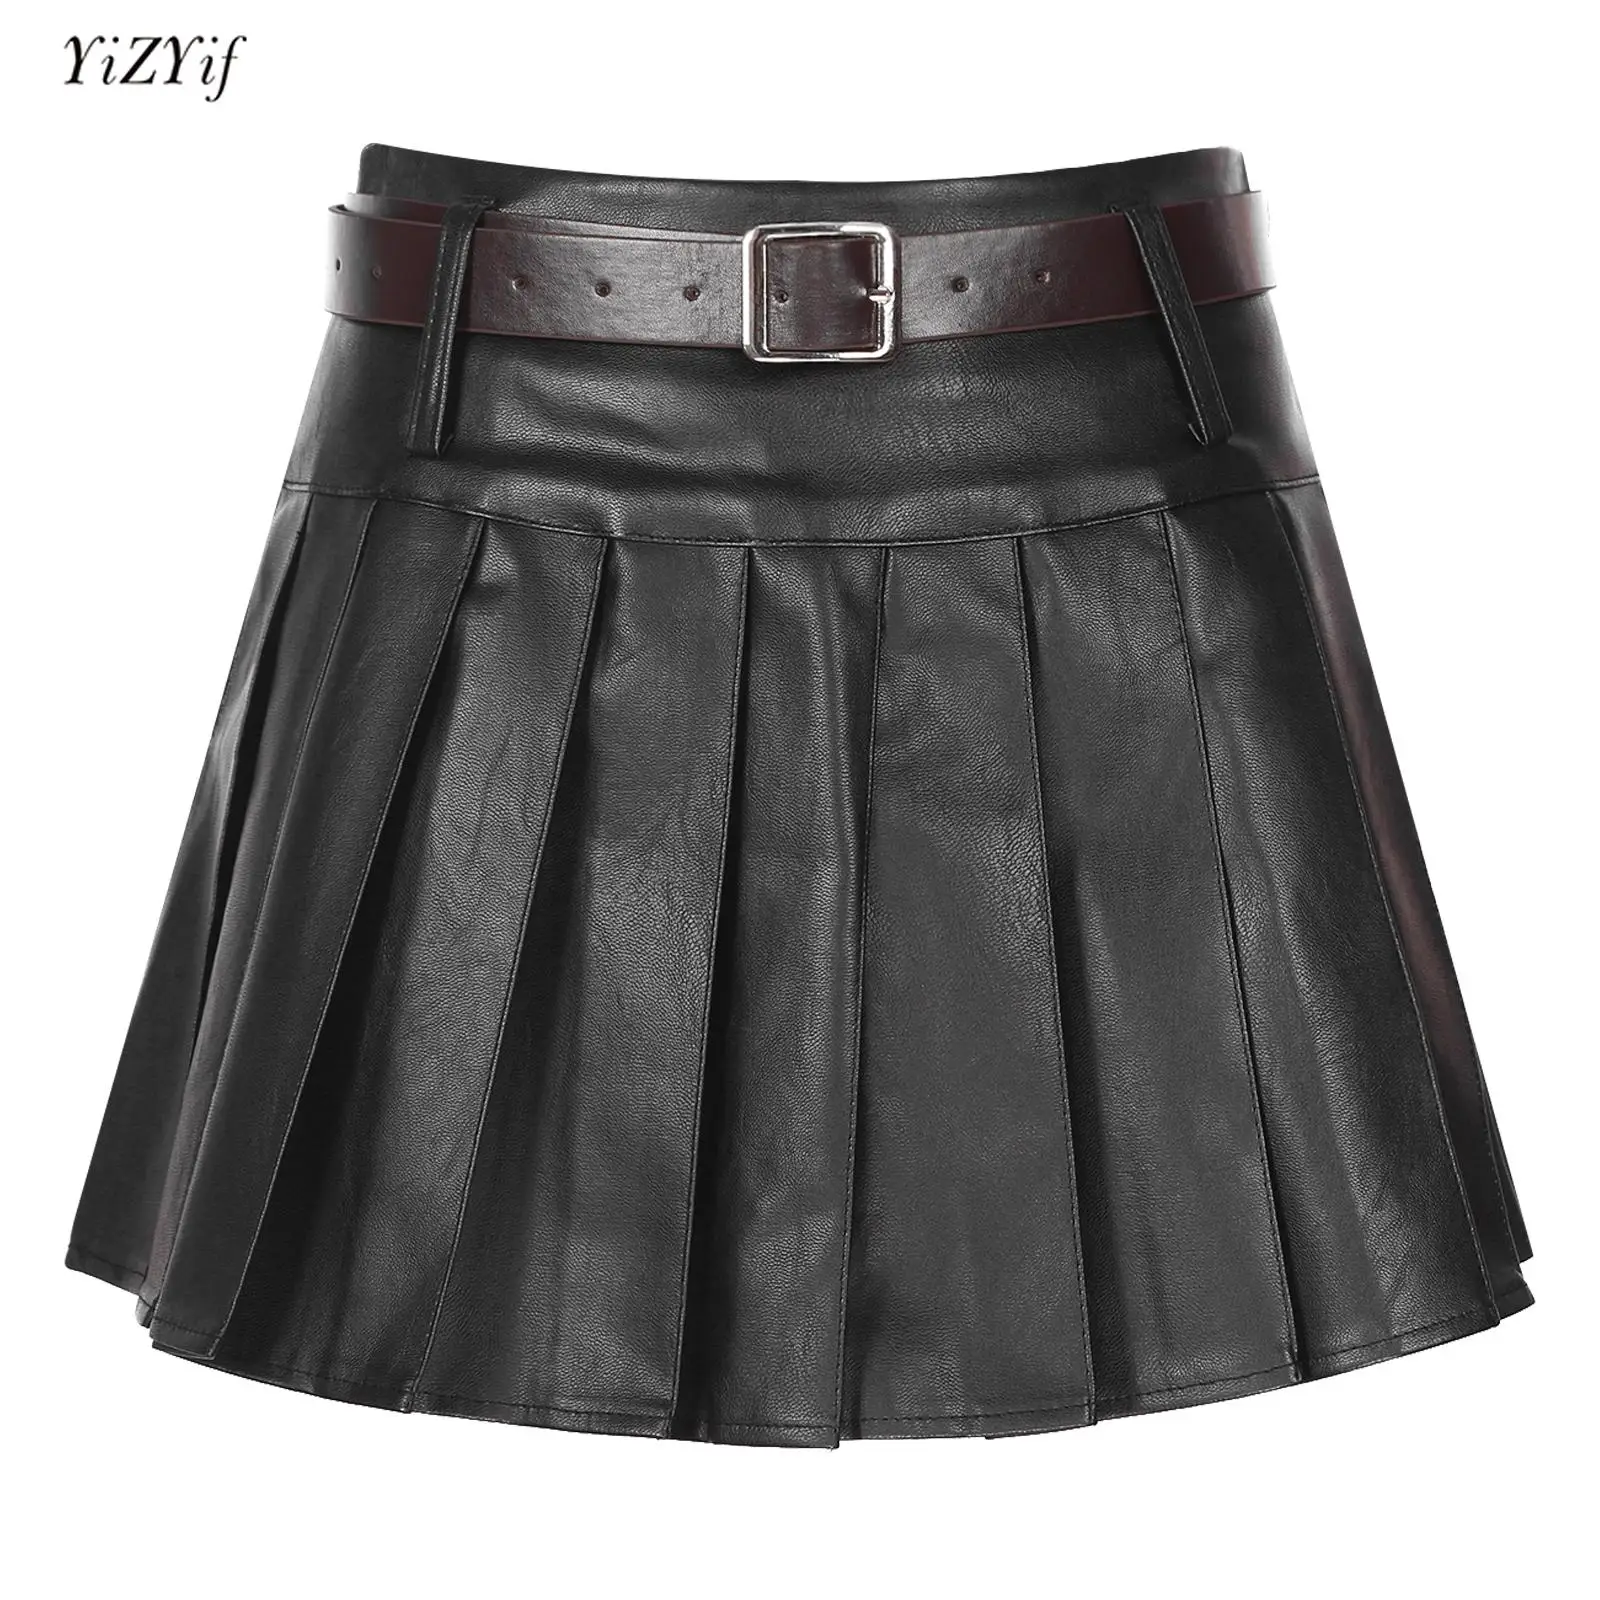 Womens Faux Leather Pleated Skirt Fashion Clubwear High Waist Built-in Shorts Skirts with Adjustable Belt Party Street Dancewear enec cb lorawan 7 pin connector ip66 led street light 60w 100w with nema socket housing